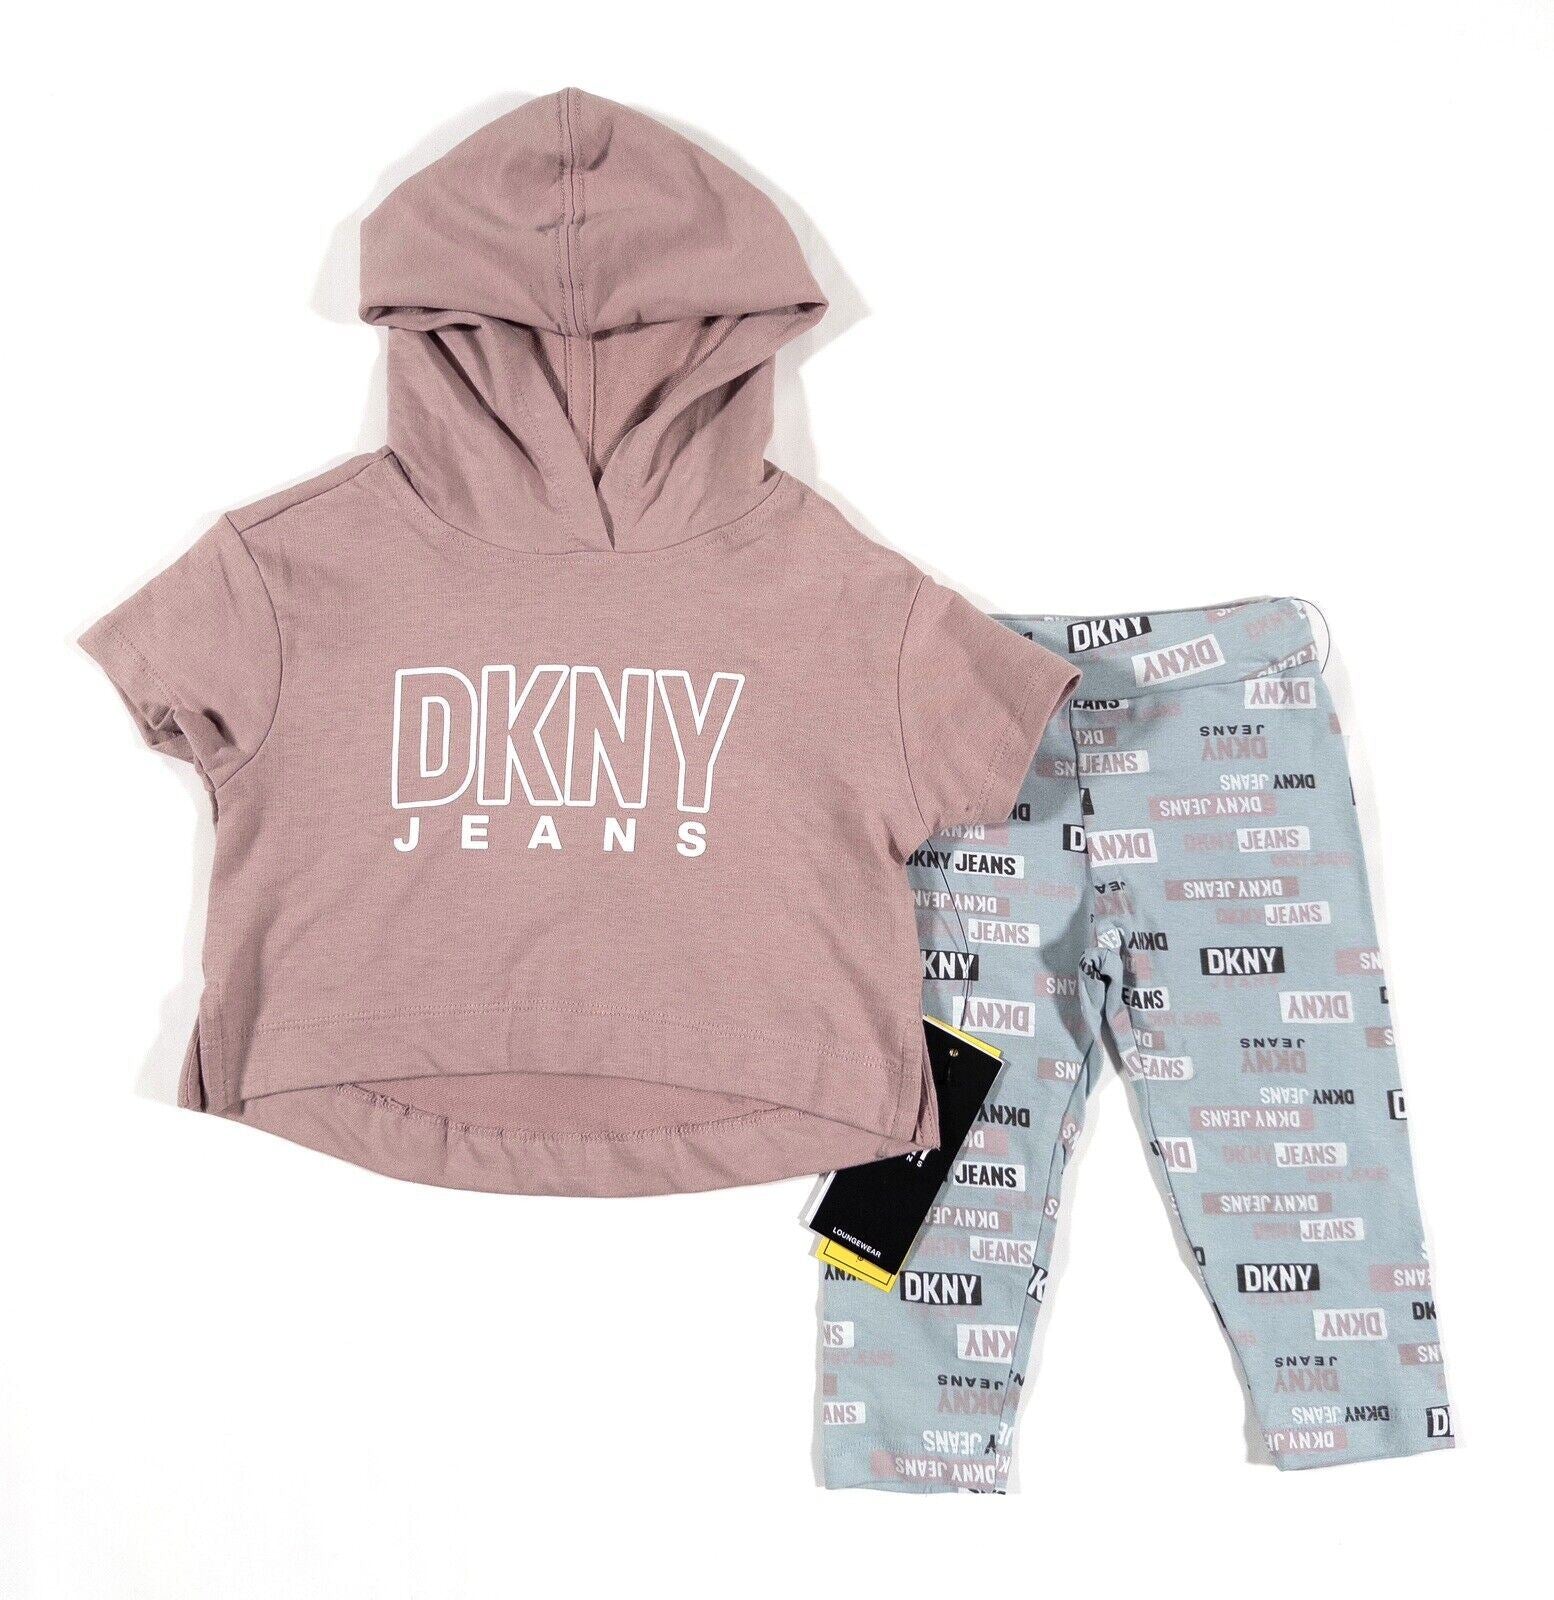 DKNY Infant Girls Hooded Top Trousers Leggings Pink Blue Size UK 18 Months